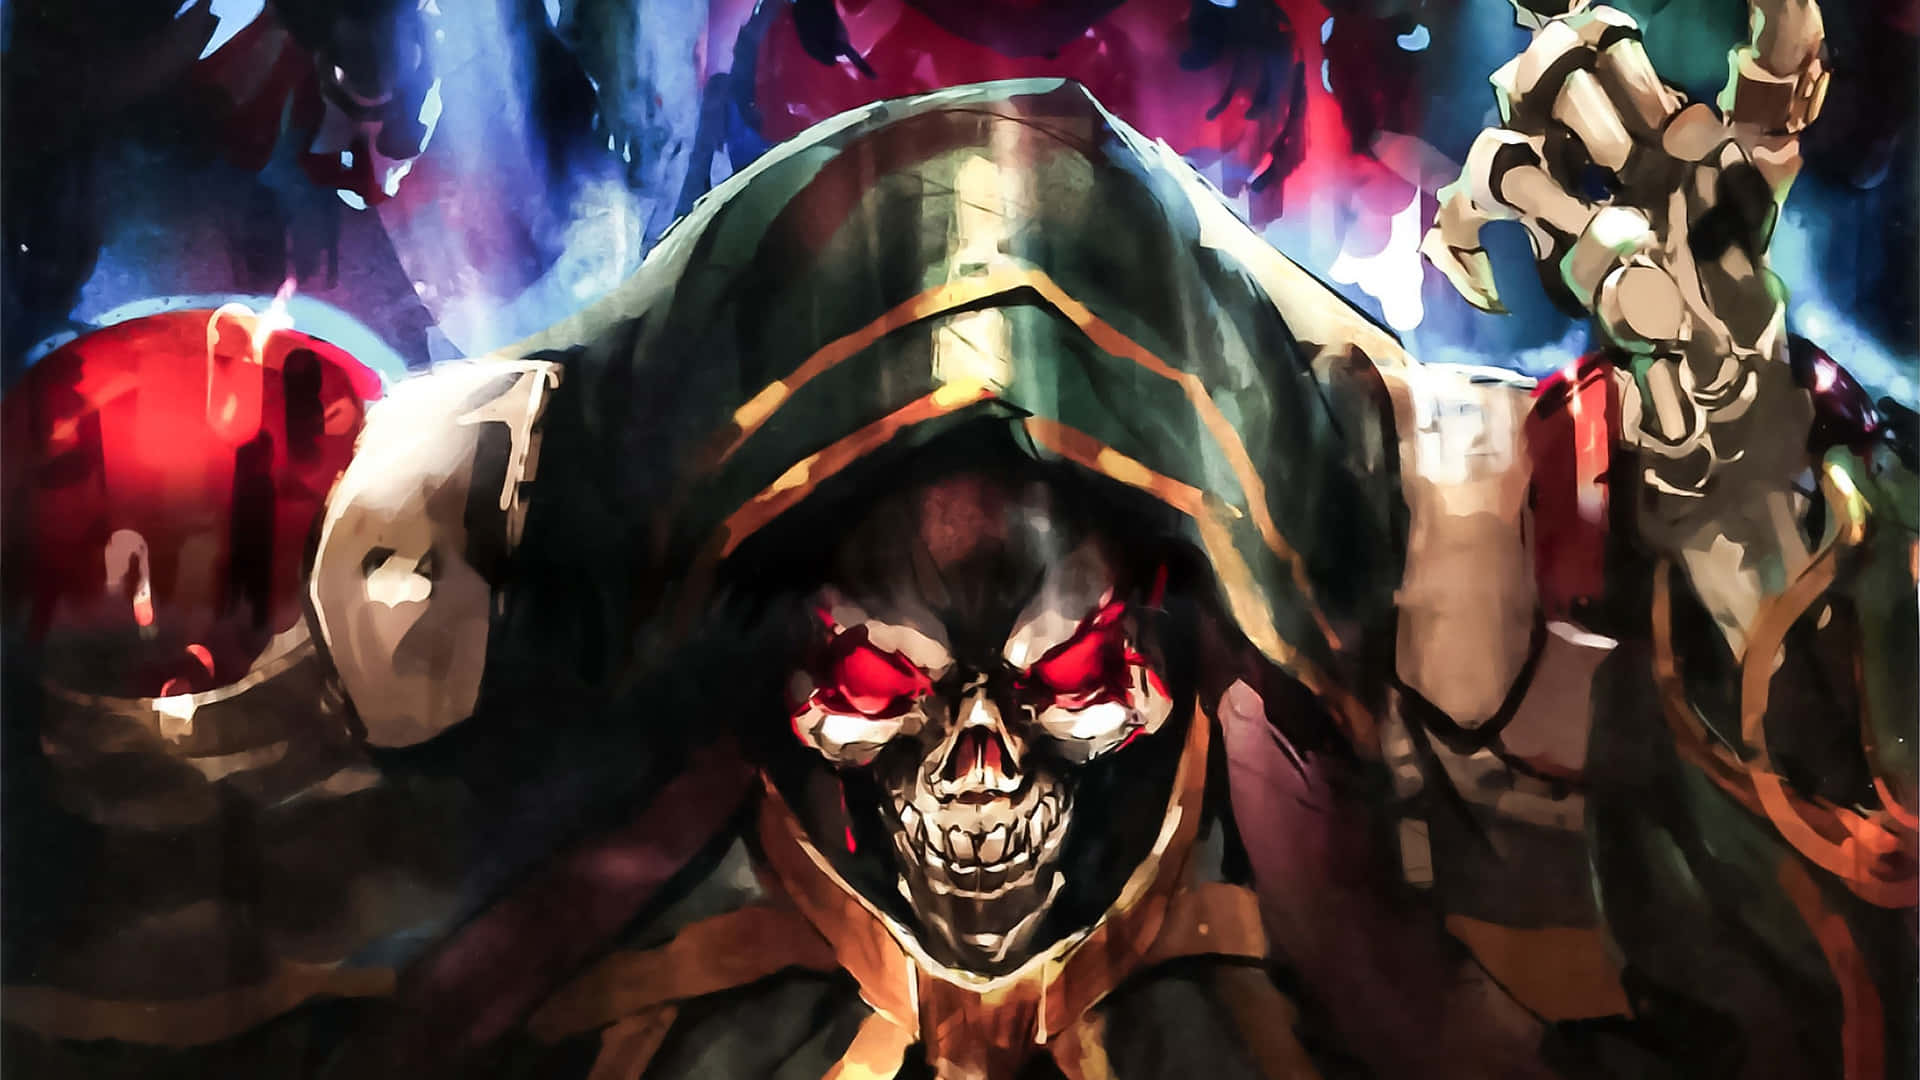 "I am Ainz Ooal Gown, the Overlord"